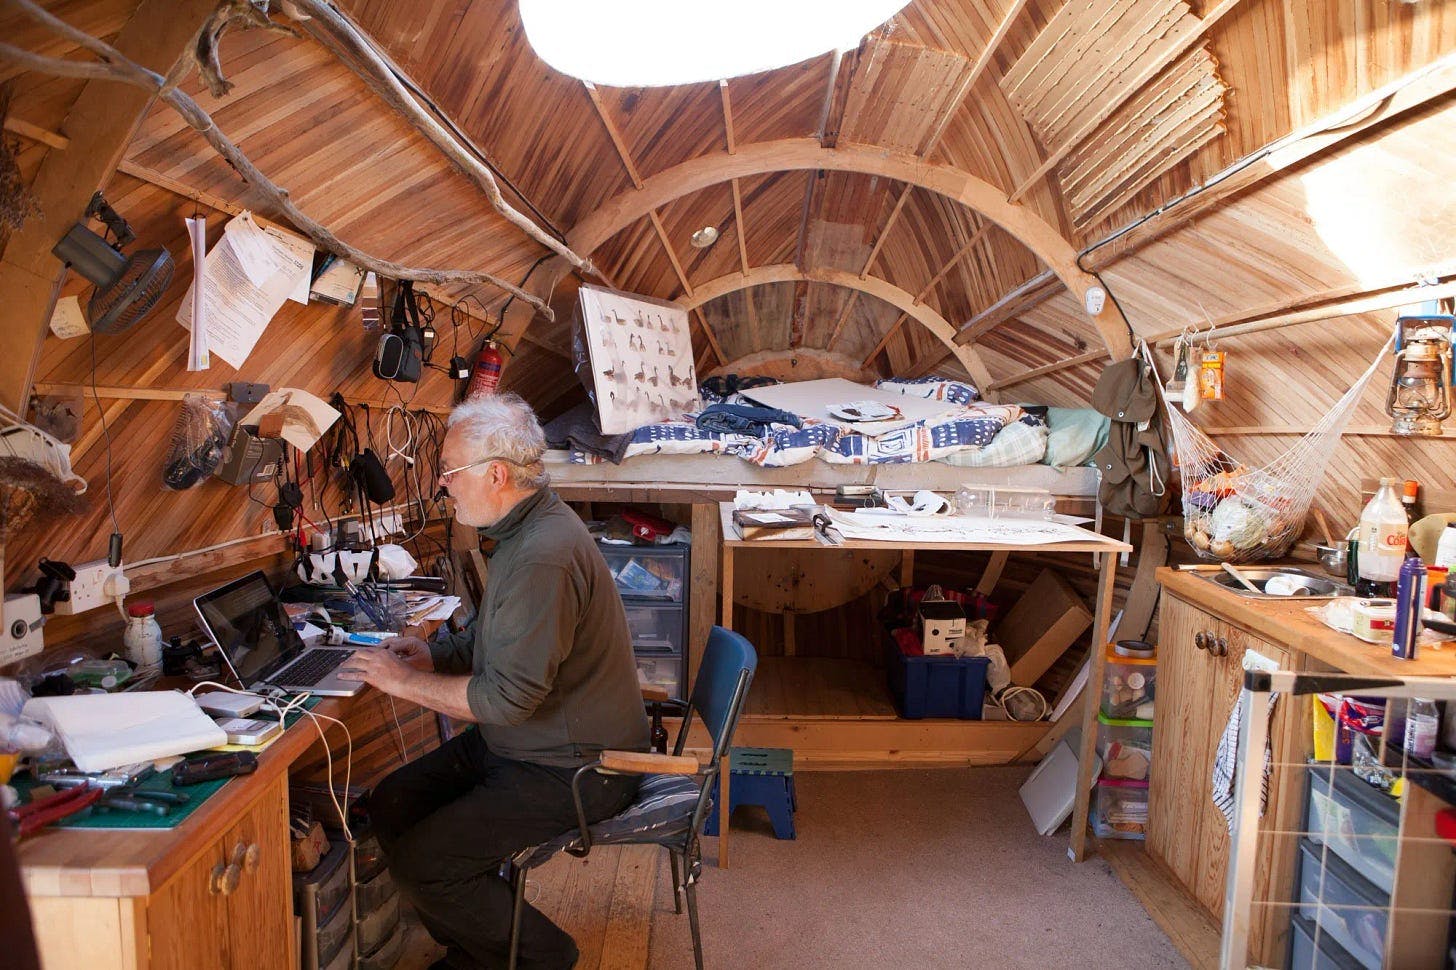 Exbury Egg, by Stephen Turner, 2013. [A man sits inside a homey oval wooden structure that almost looks like the hull of a ship. He works from a laptop on a desk strewn with stuff. Behind him is a kitchenette and beyond him looks like a living area.]